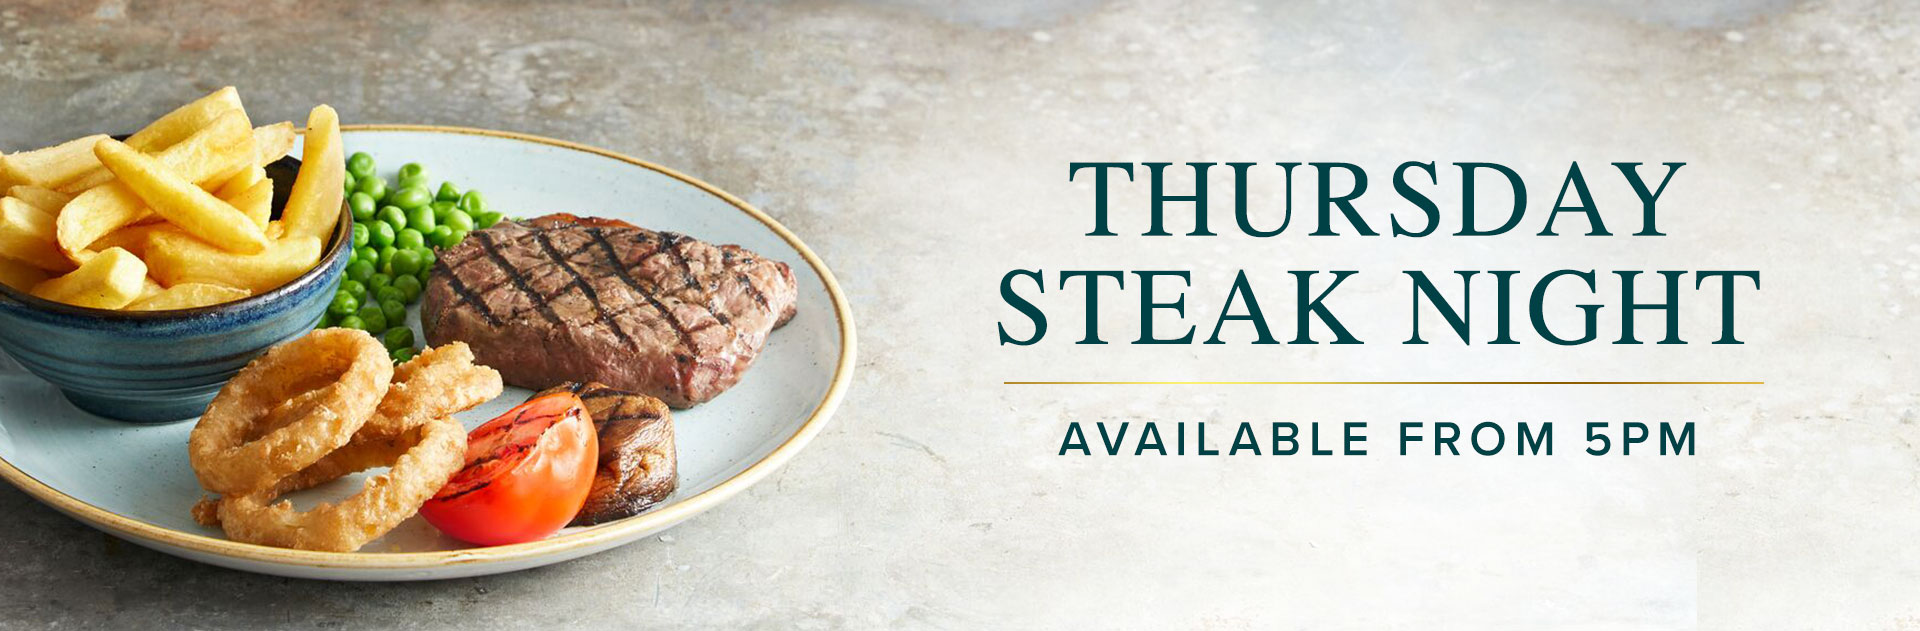 Thursday Steak Night at The Hardwick Arms